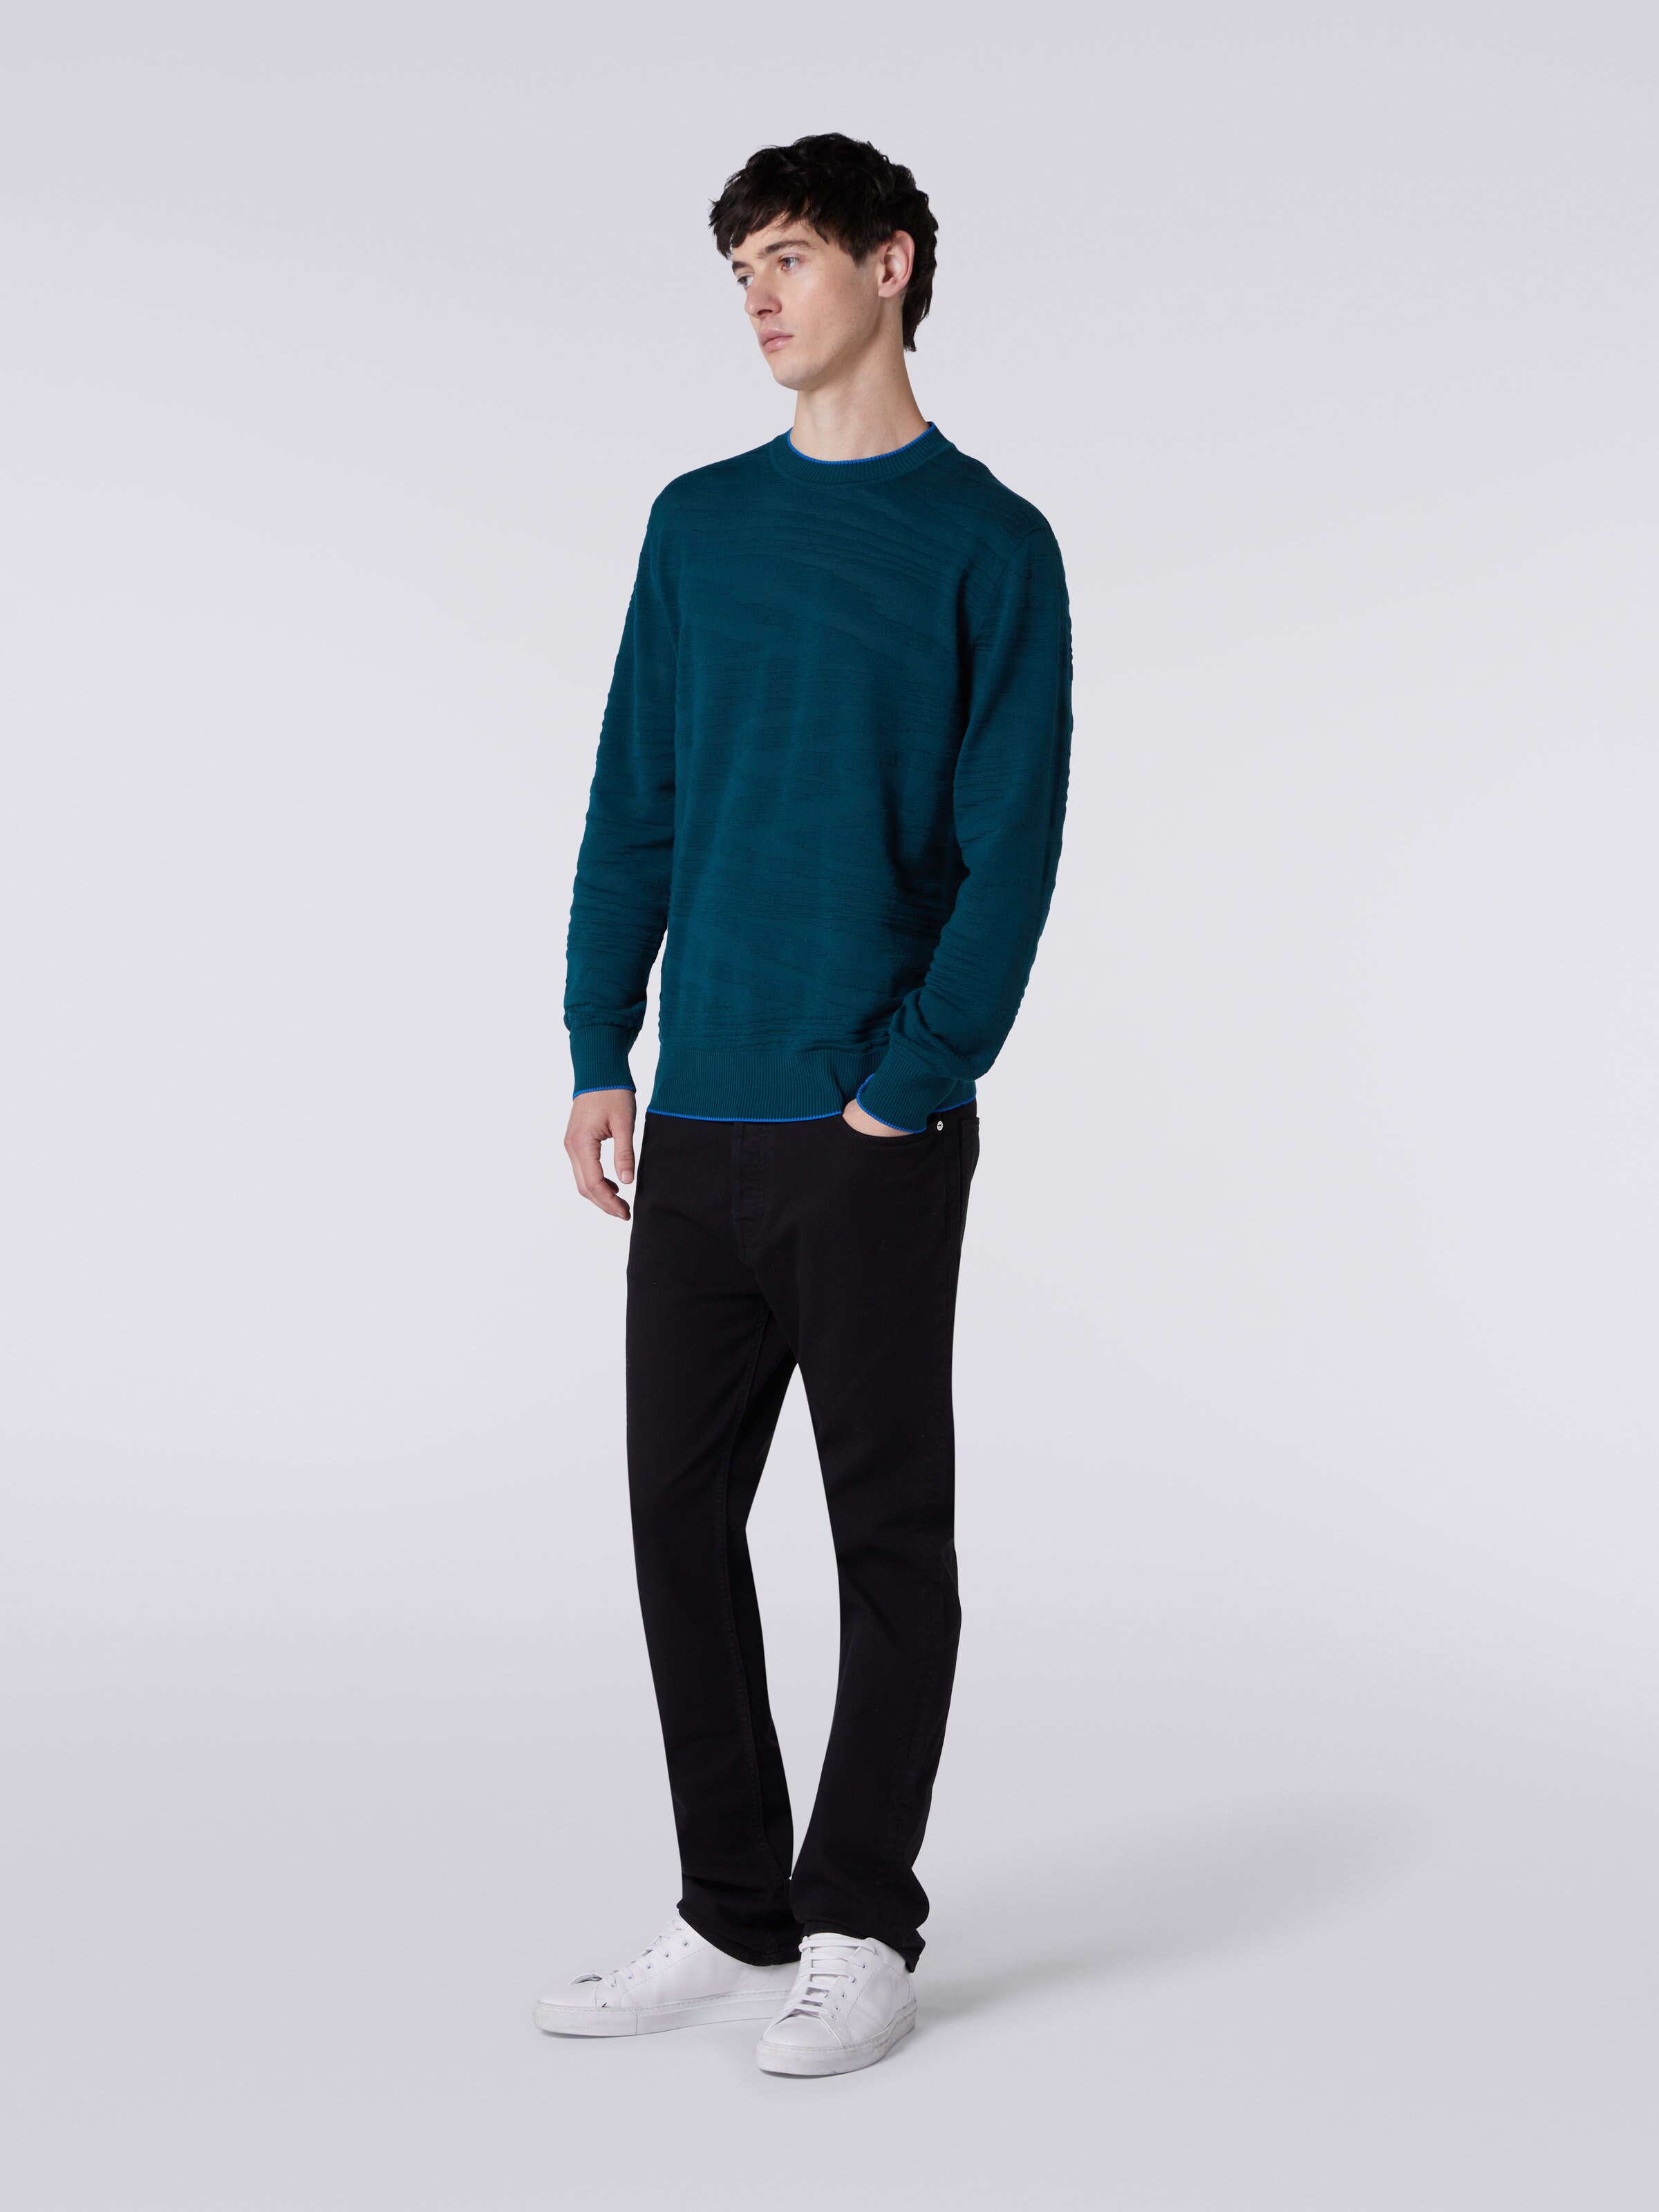 Embossed wool and viscose crew-neck pullover, Green  - 2